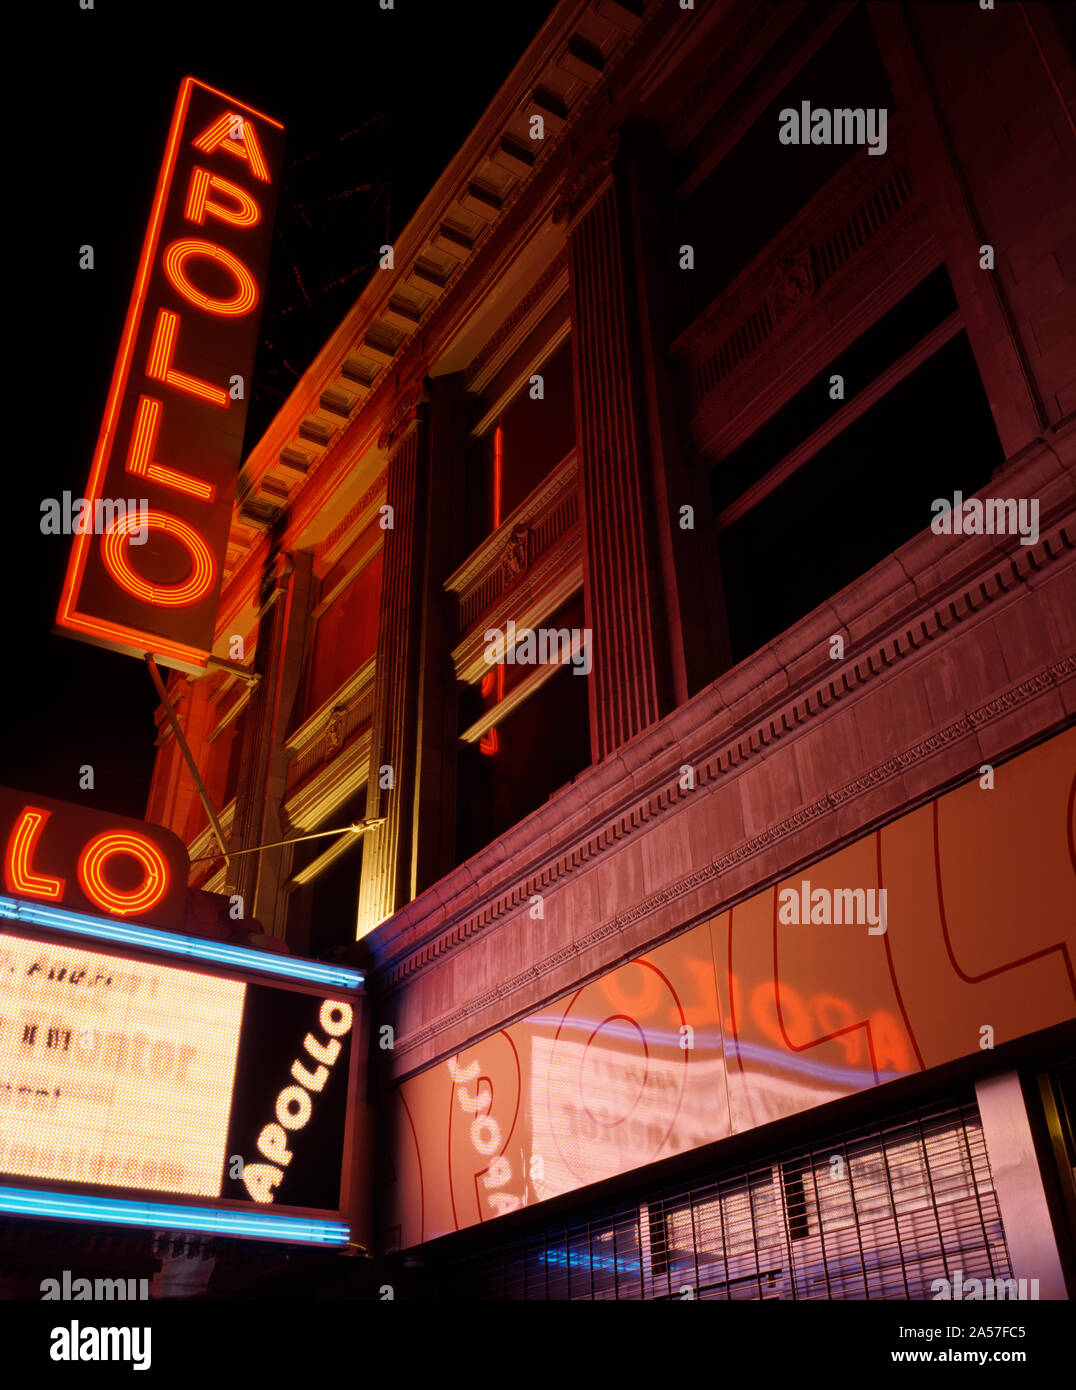 Low angle view of a theatre lit up at night, Apollo Theater, Harlem, Manhattan, New York City, New York State, USA Banque D'Images